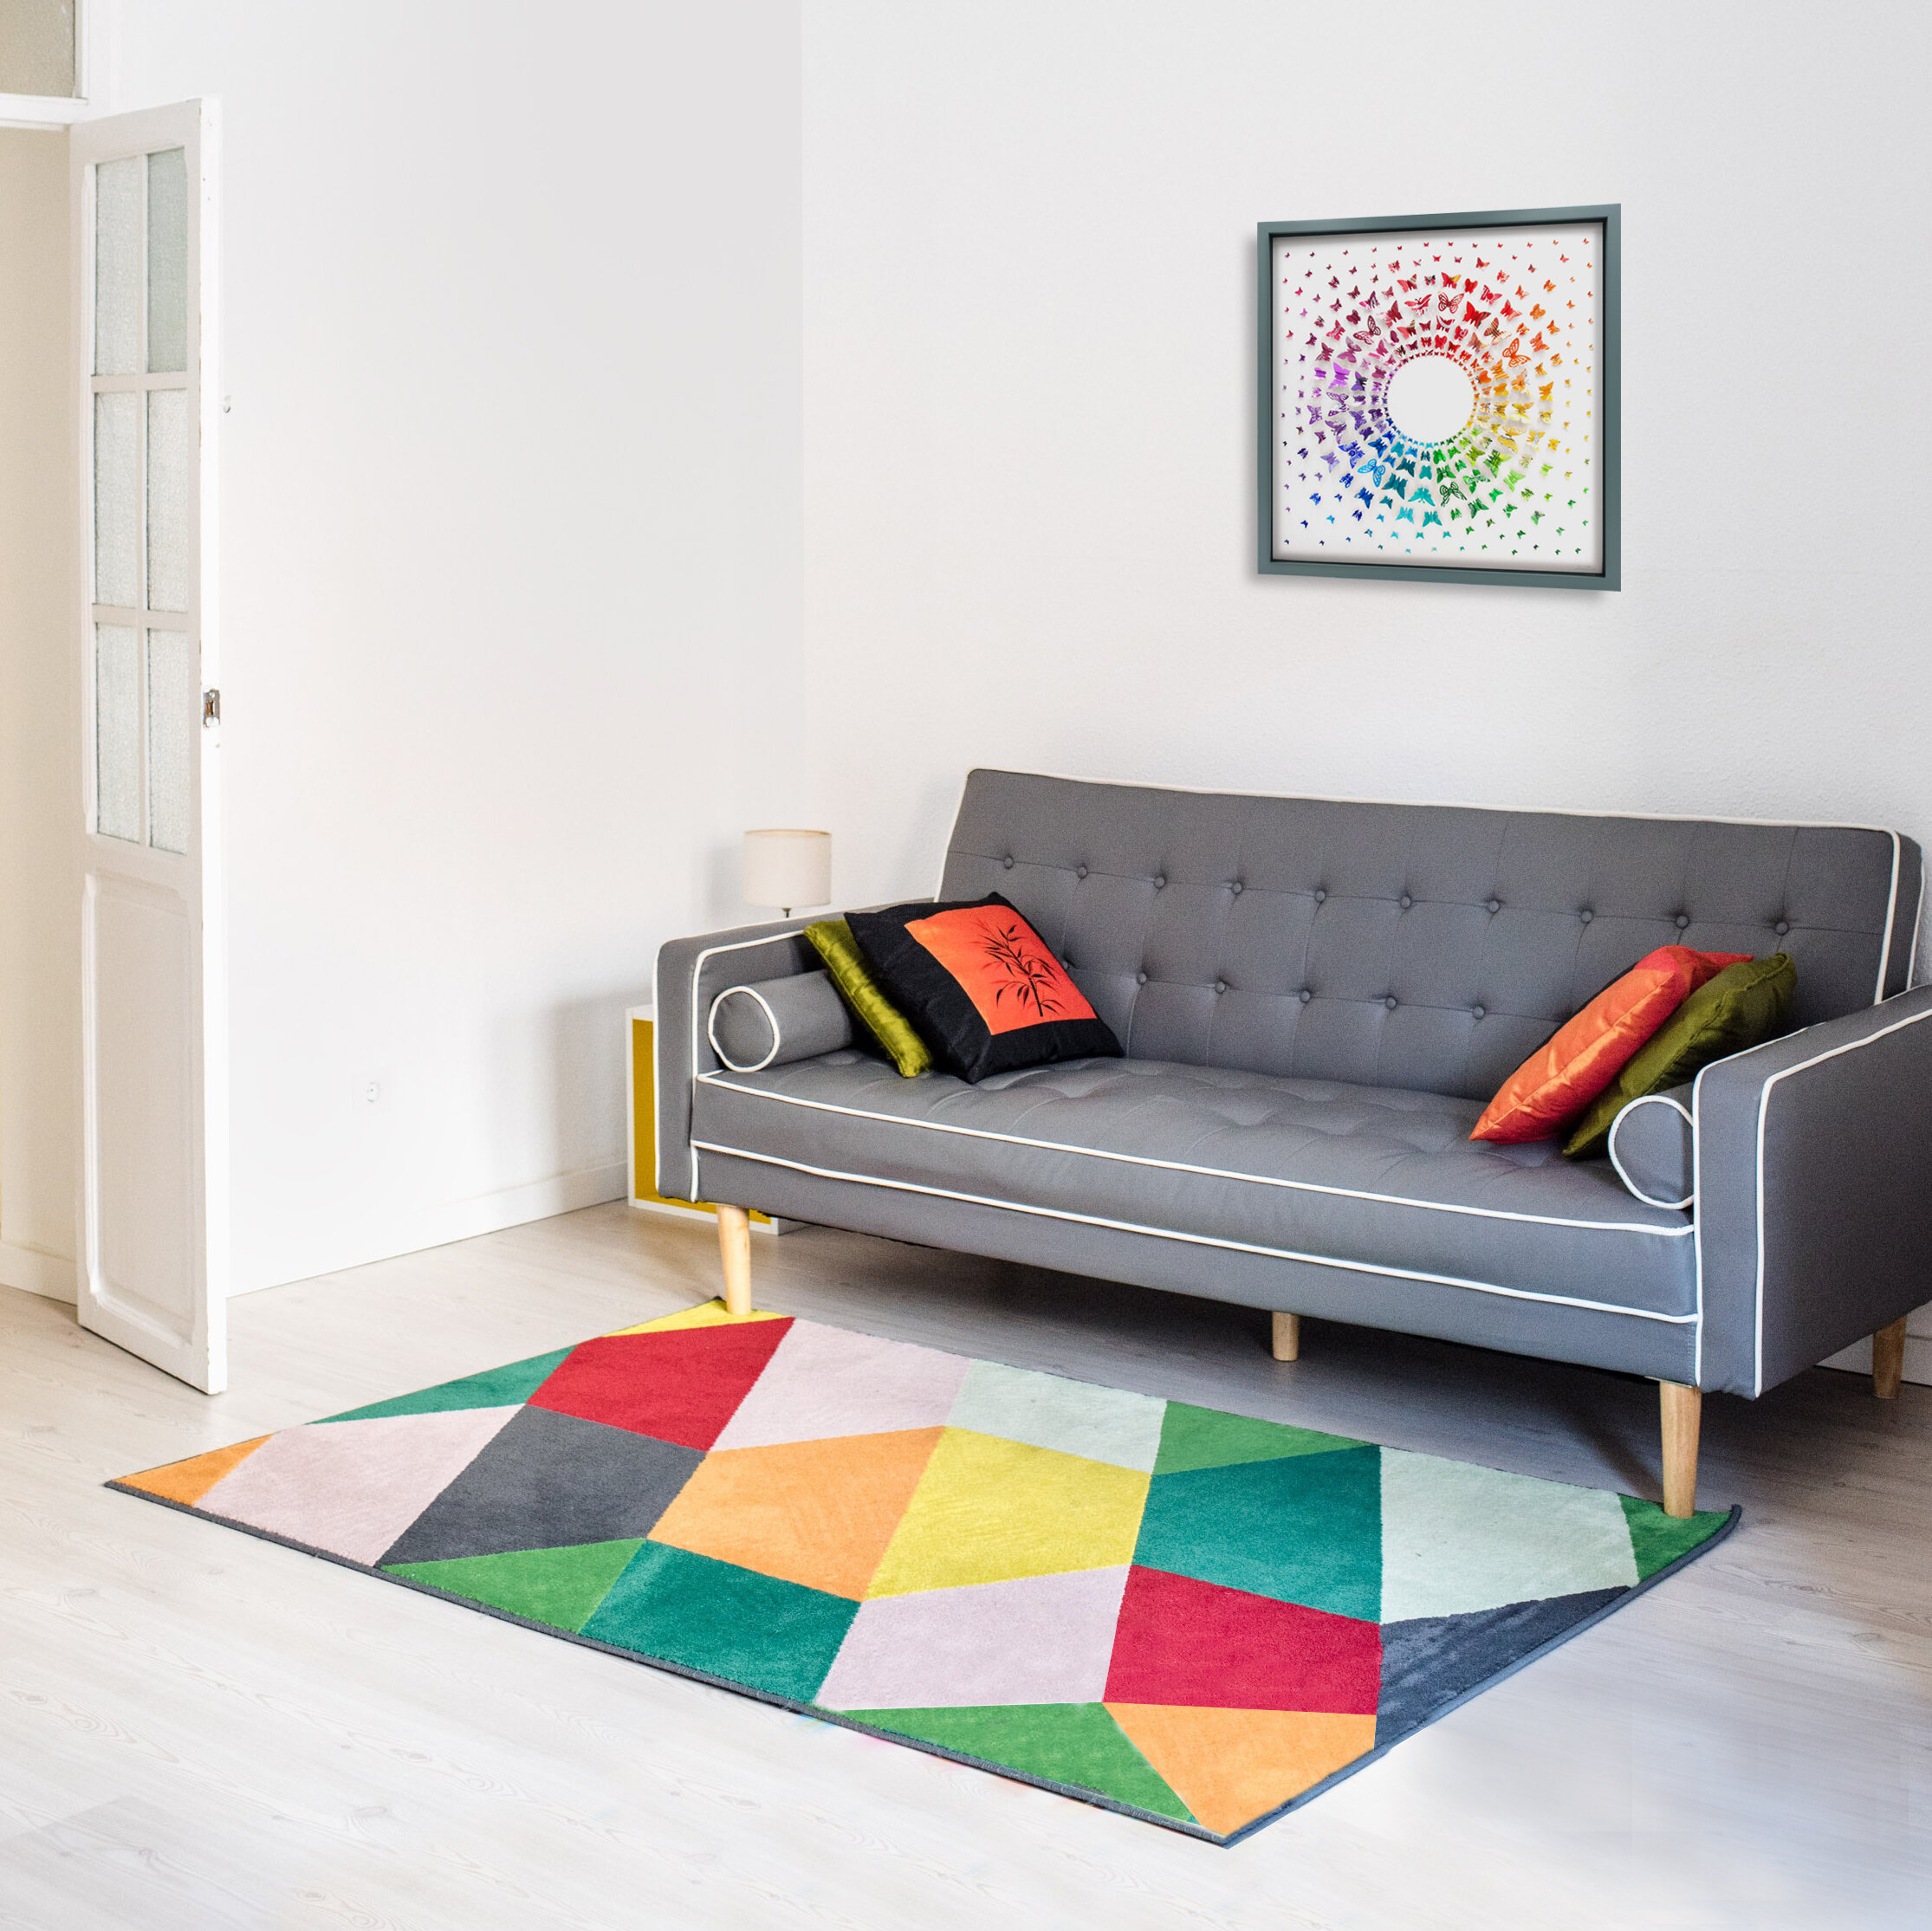 Rainbow butterflies artwork arranged in a circle hung on a wall with a sofa and rug